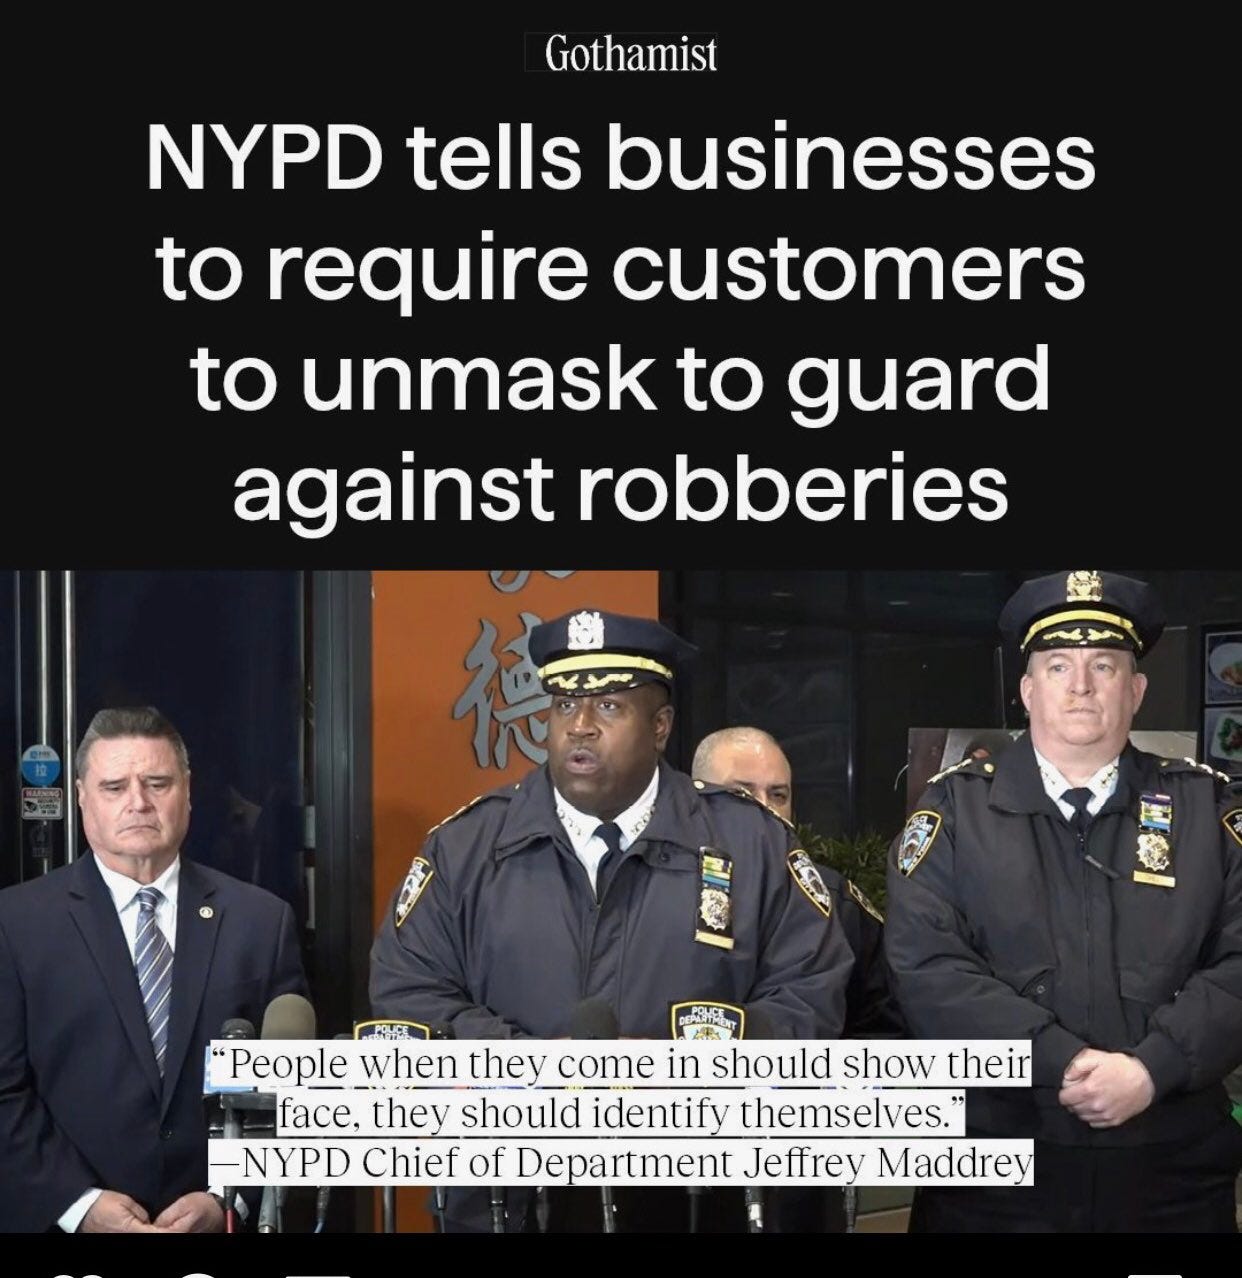 ImageImage is of a Gothamist headline with a picture of police officers. Headline reads NYPD tells businesses to require customers to unmask to guard against robberies. A quote states “People when they come in should show their face, they should identify themselves.” — NYPD Chief of Department Jeffrey Maddrey.